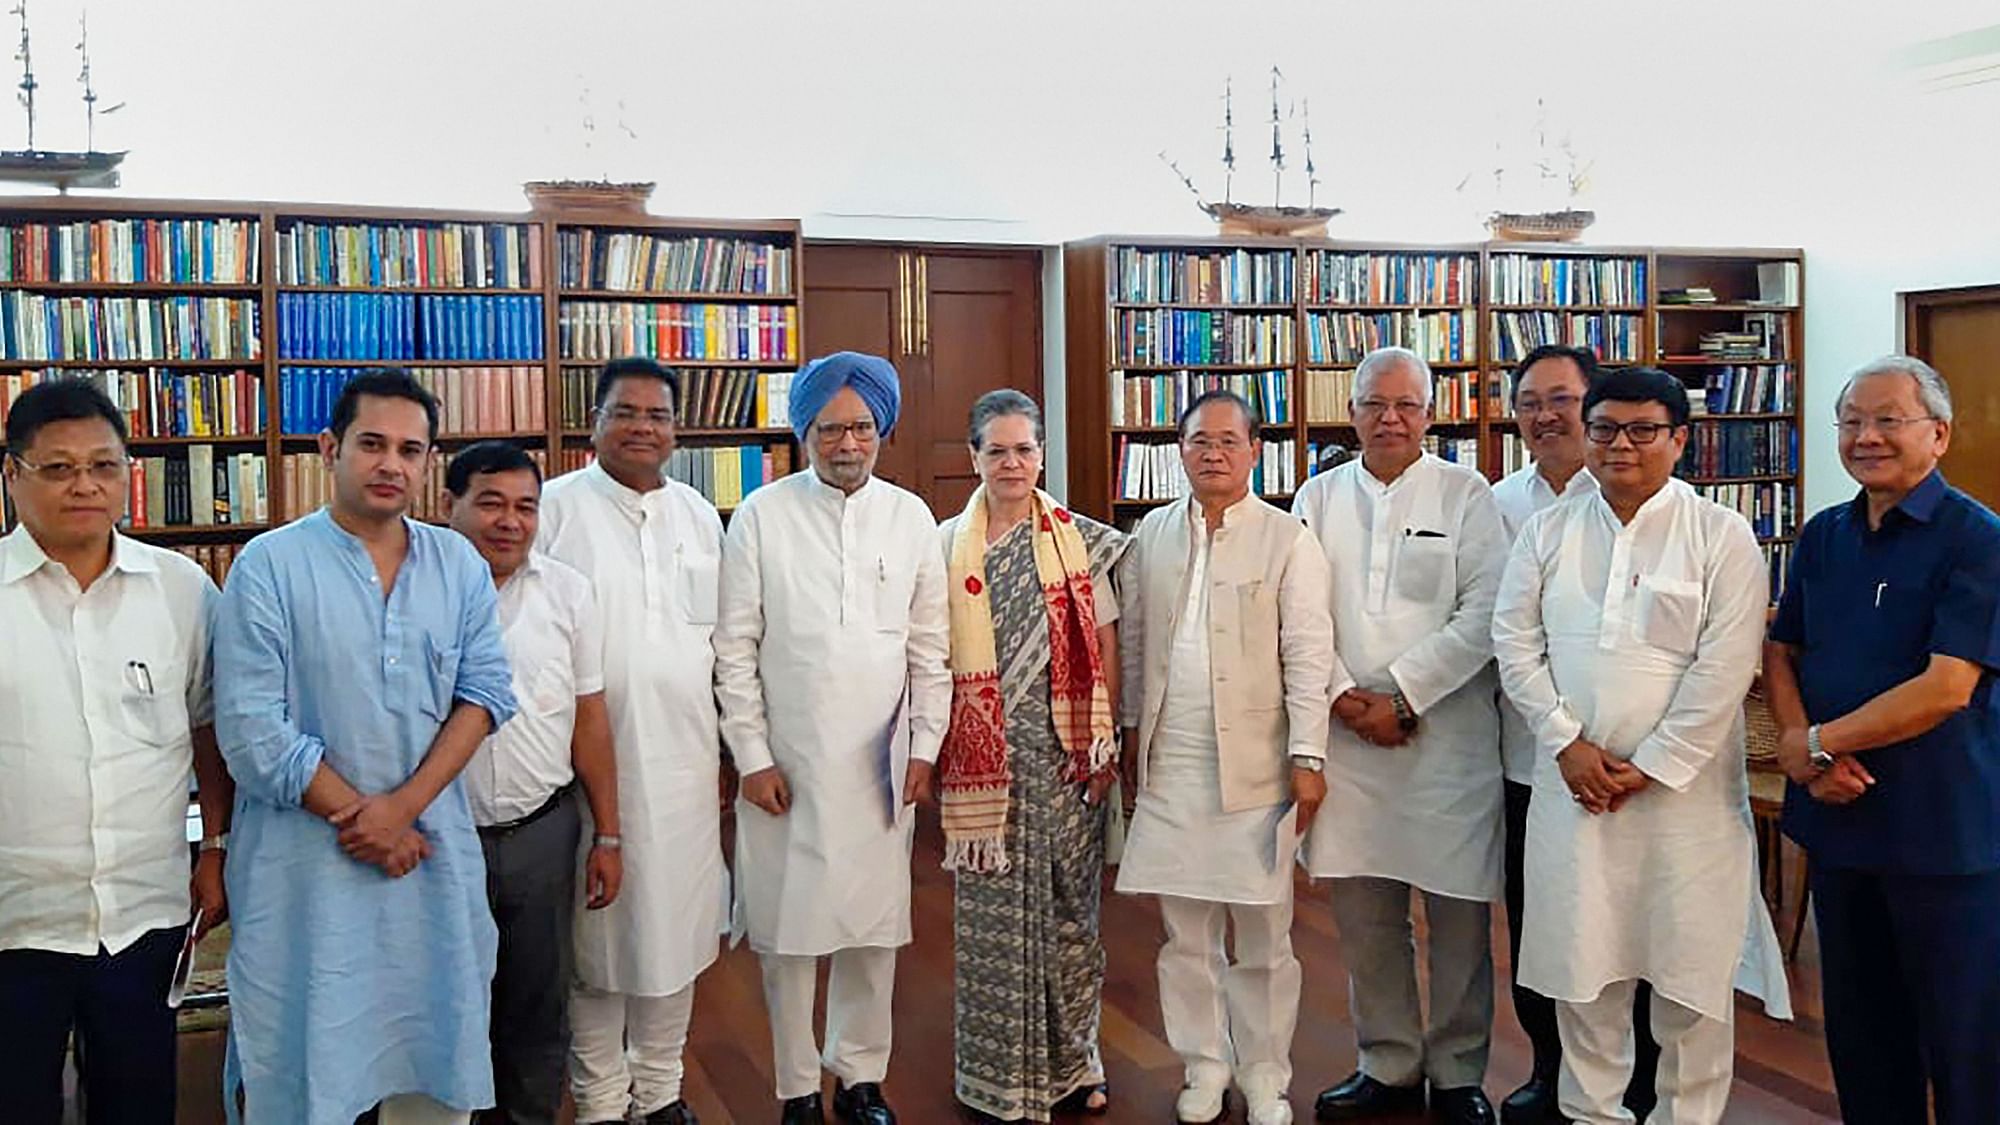  Congress interim President Sonia Gandhi, senior party leader Manmohan Singh and other leaders from North-Eastern states, pose for a photograph in New Delhi on Friday, 13 September.